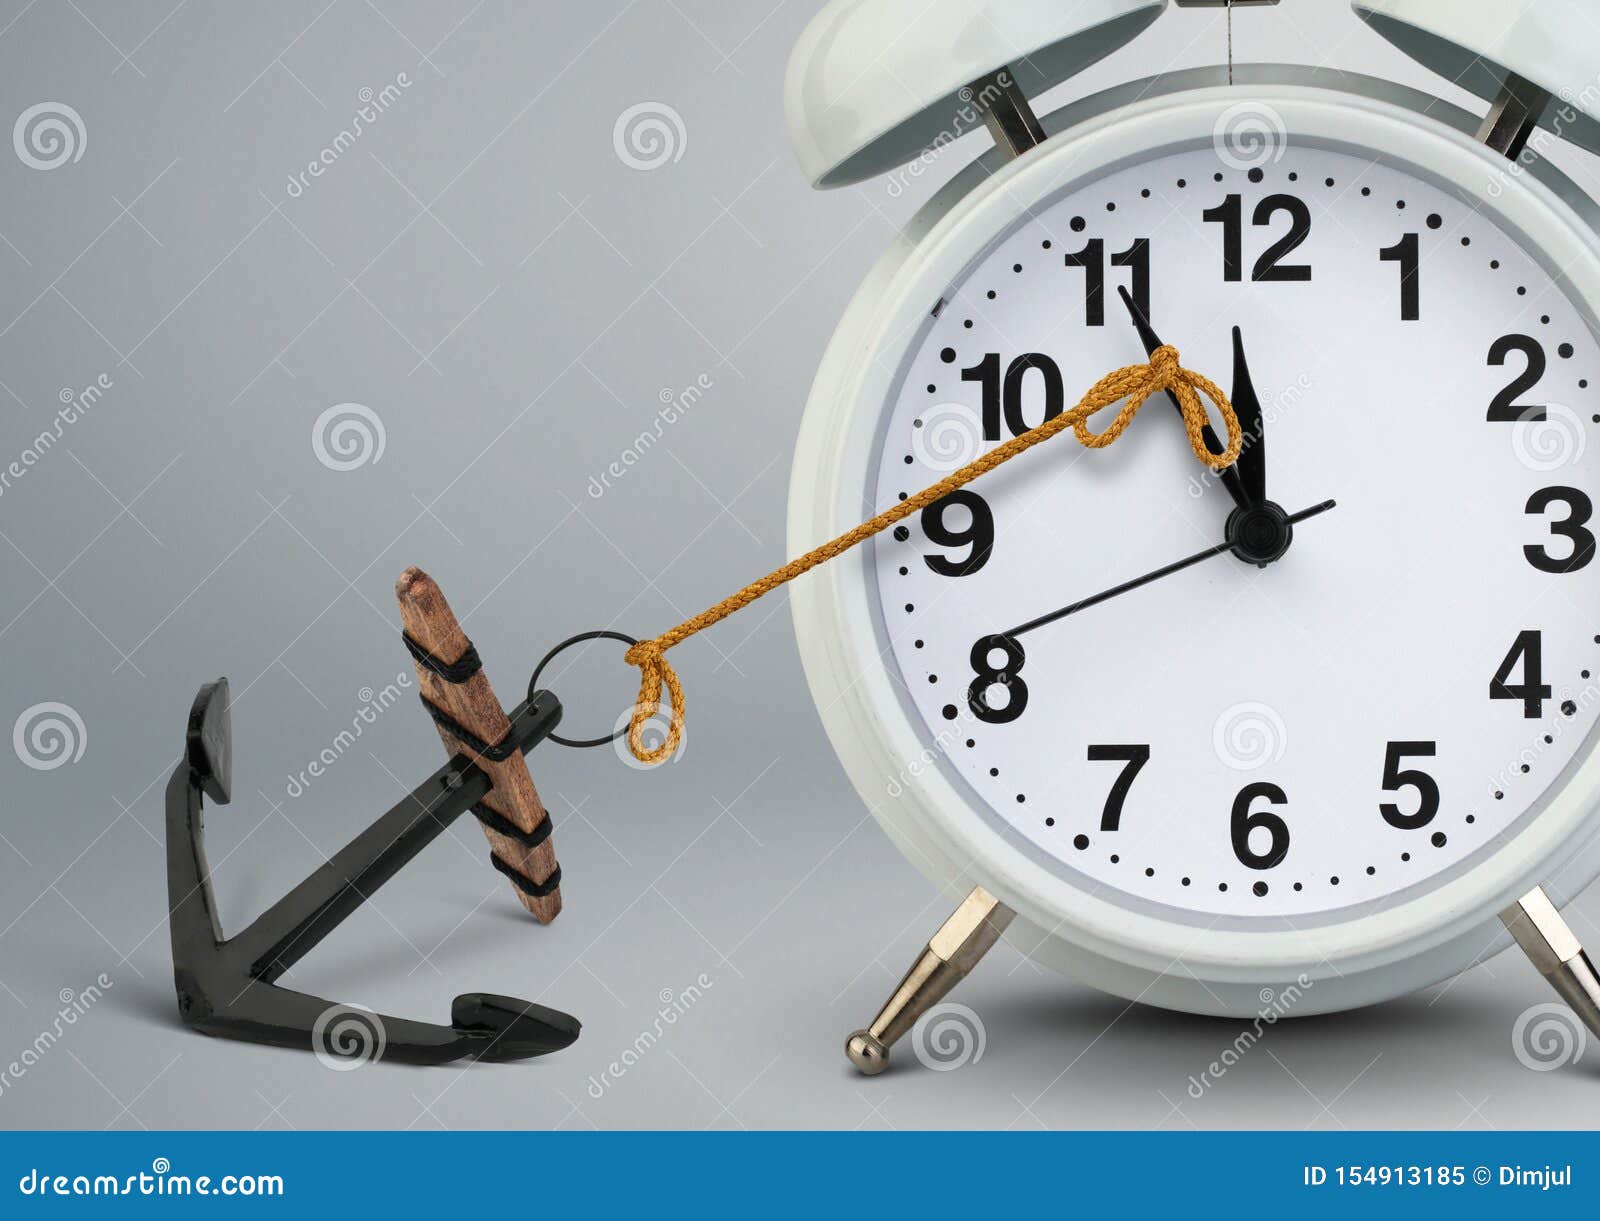 Stop Time Stock Illustration 113360023